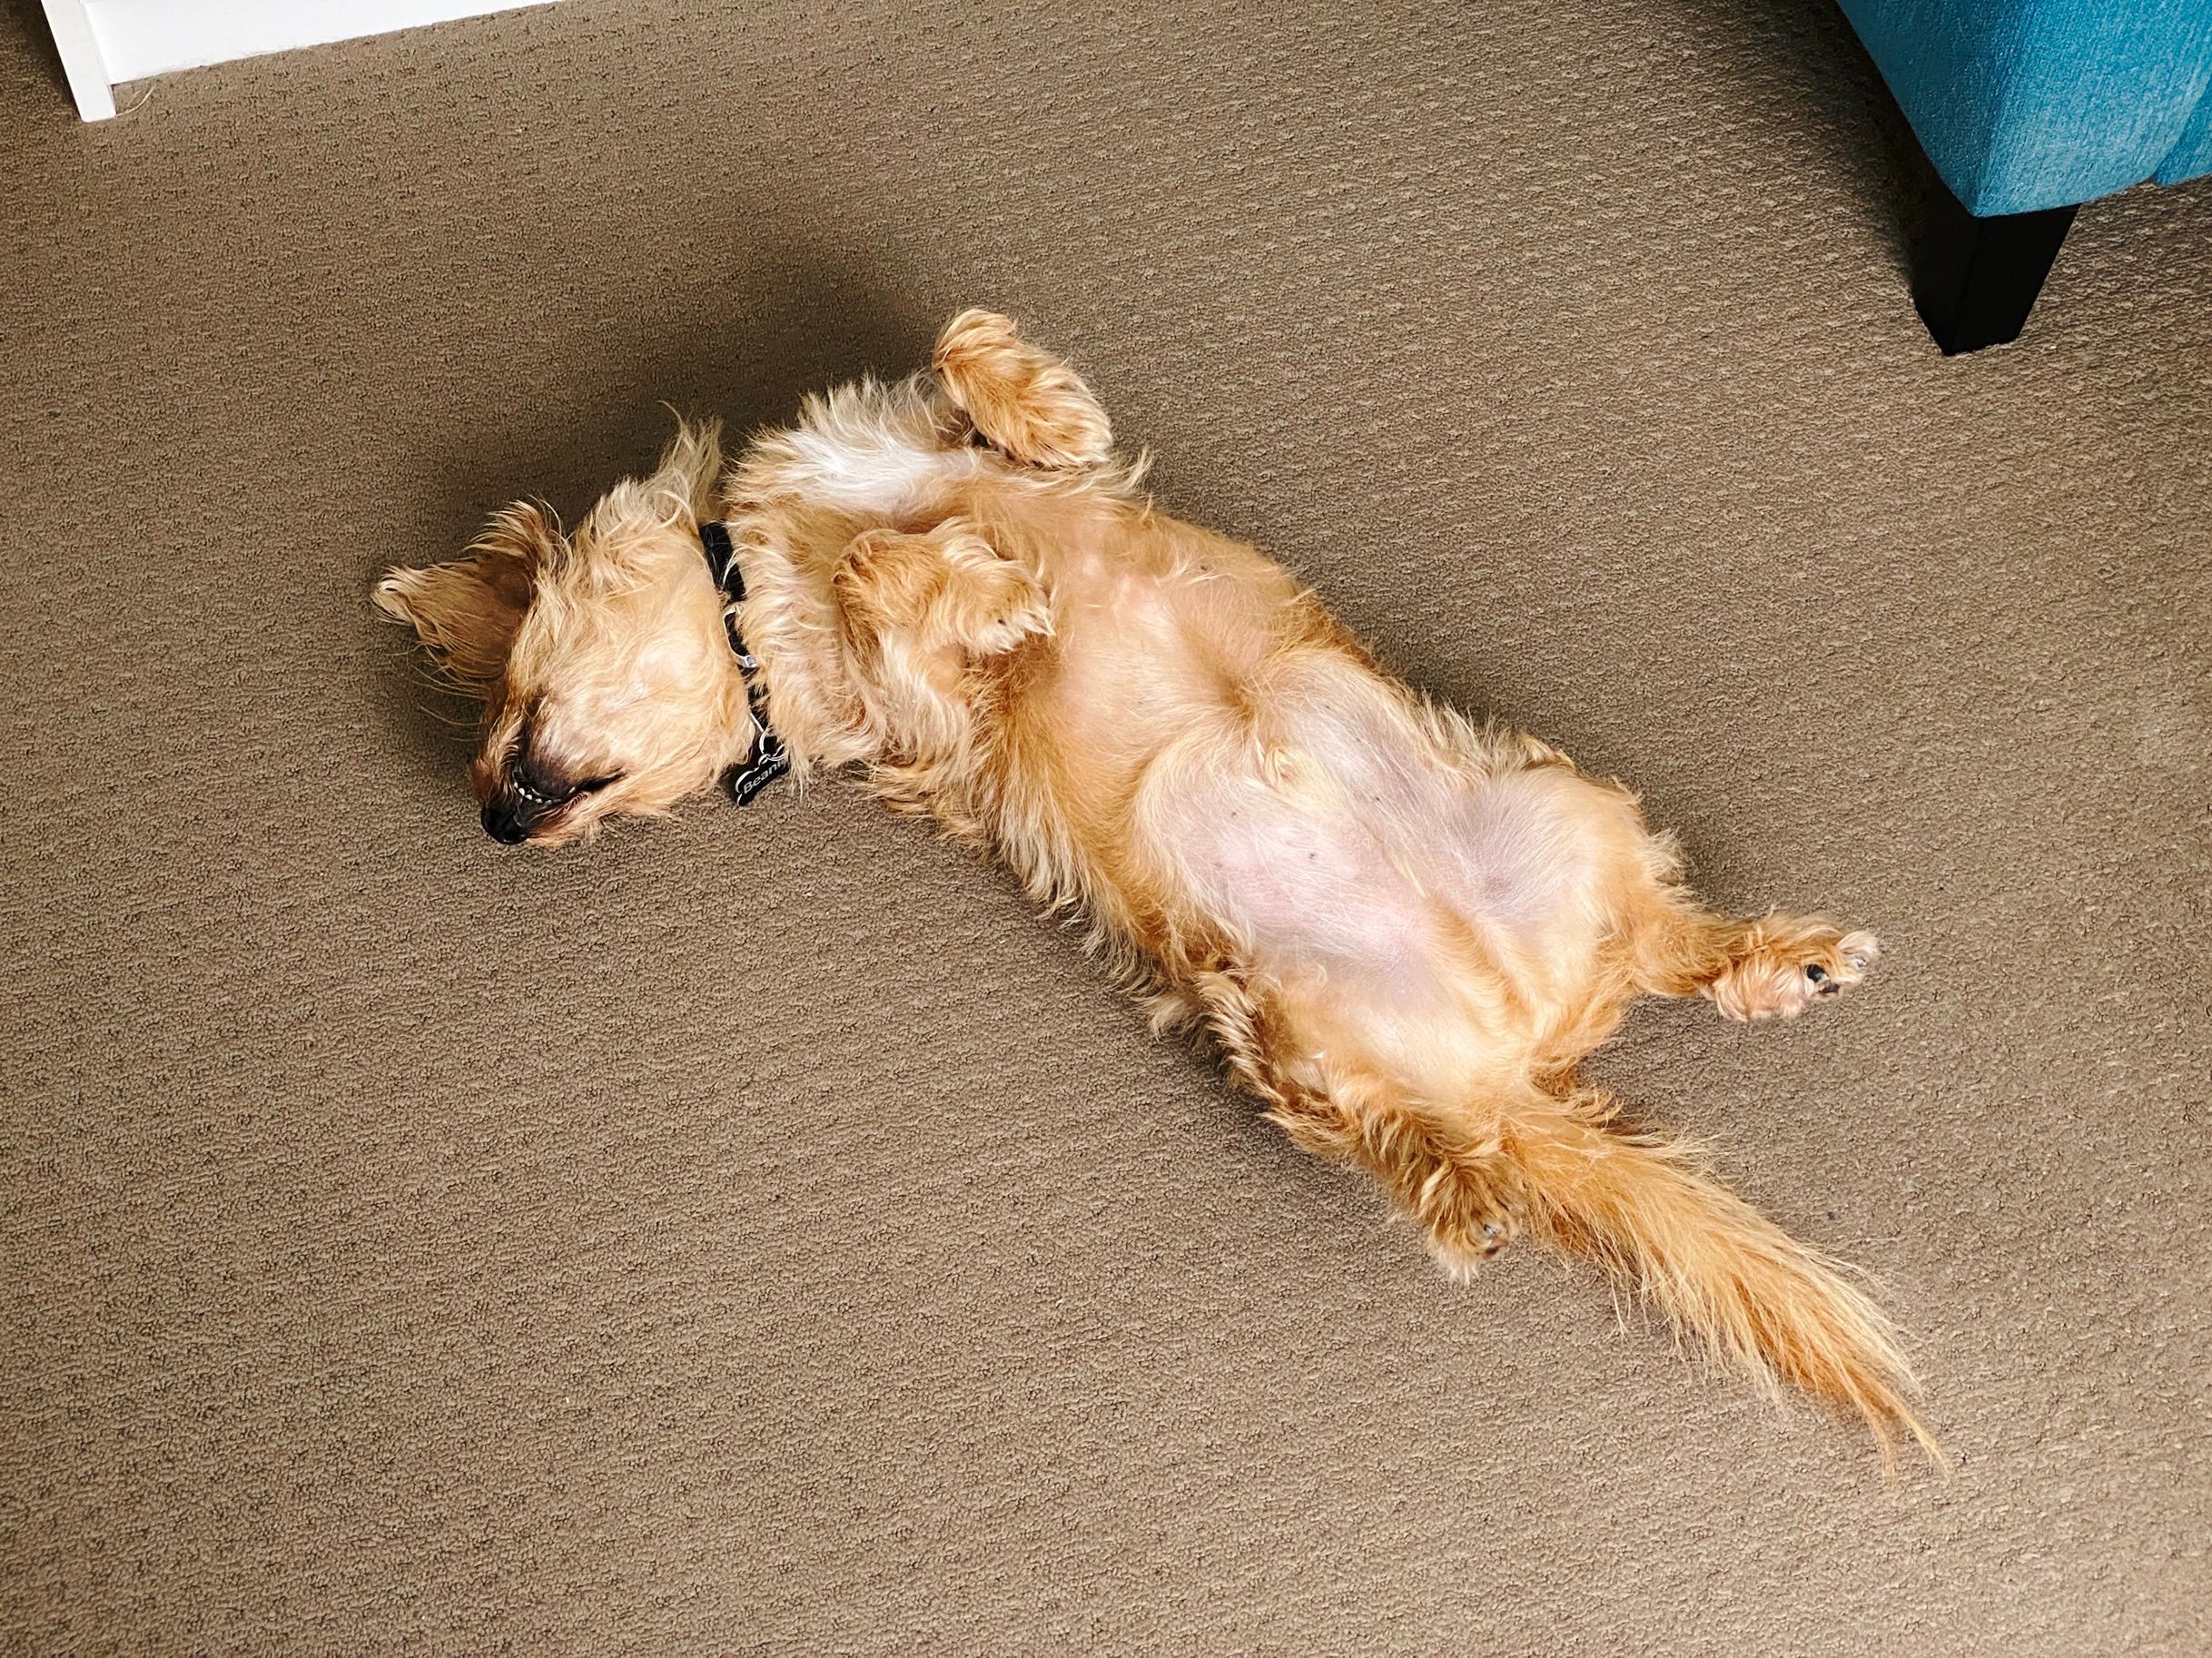 A photo of a small scruffy blonde dog lying entirely upside-down on the floor.